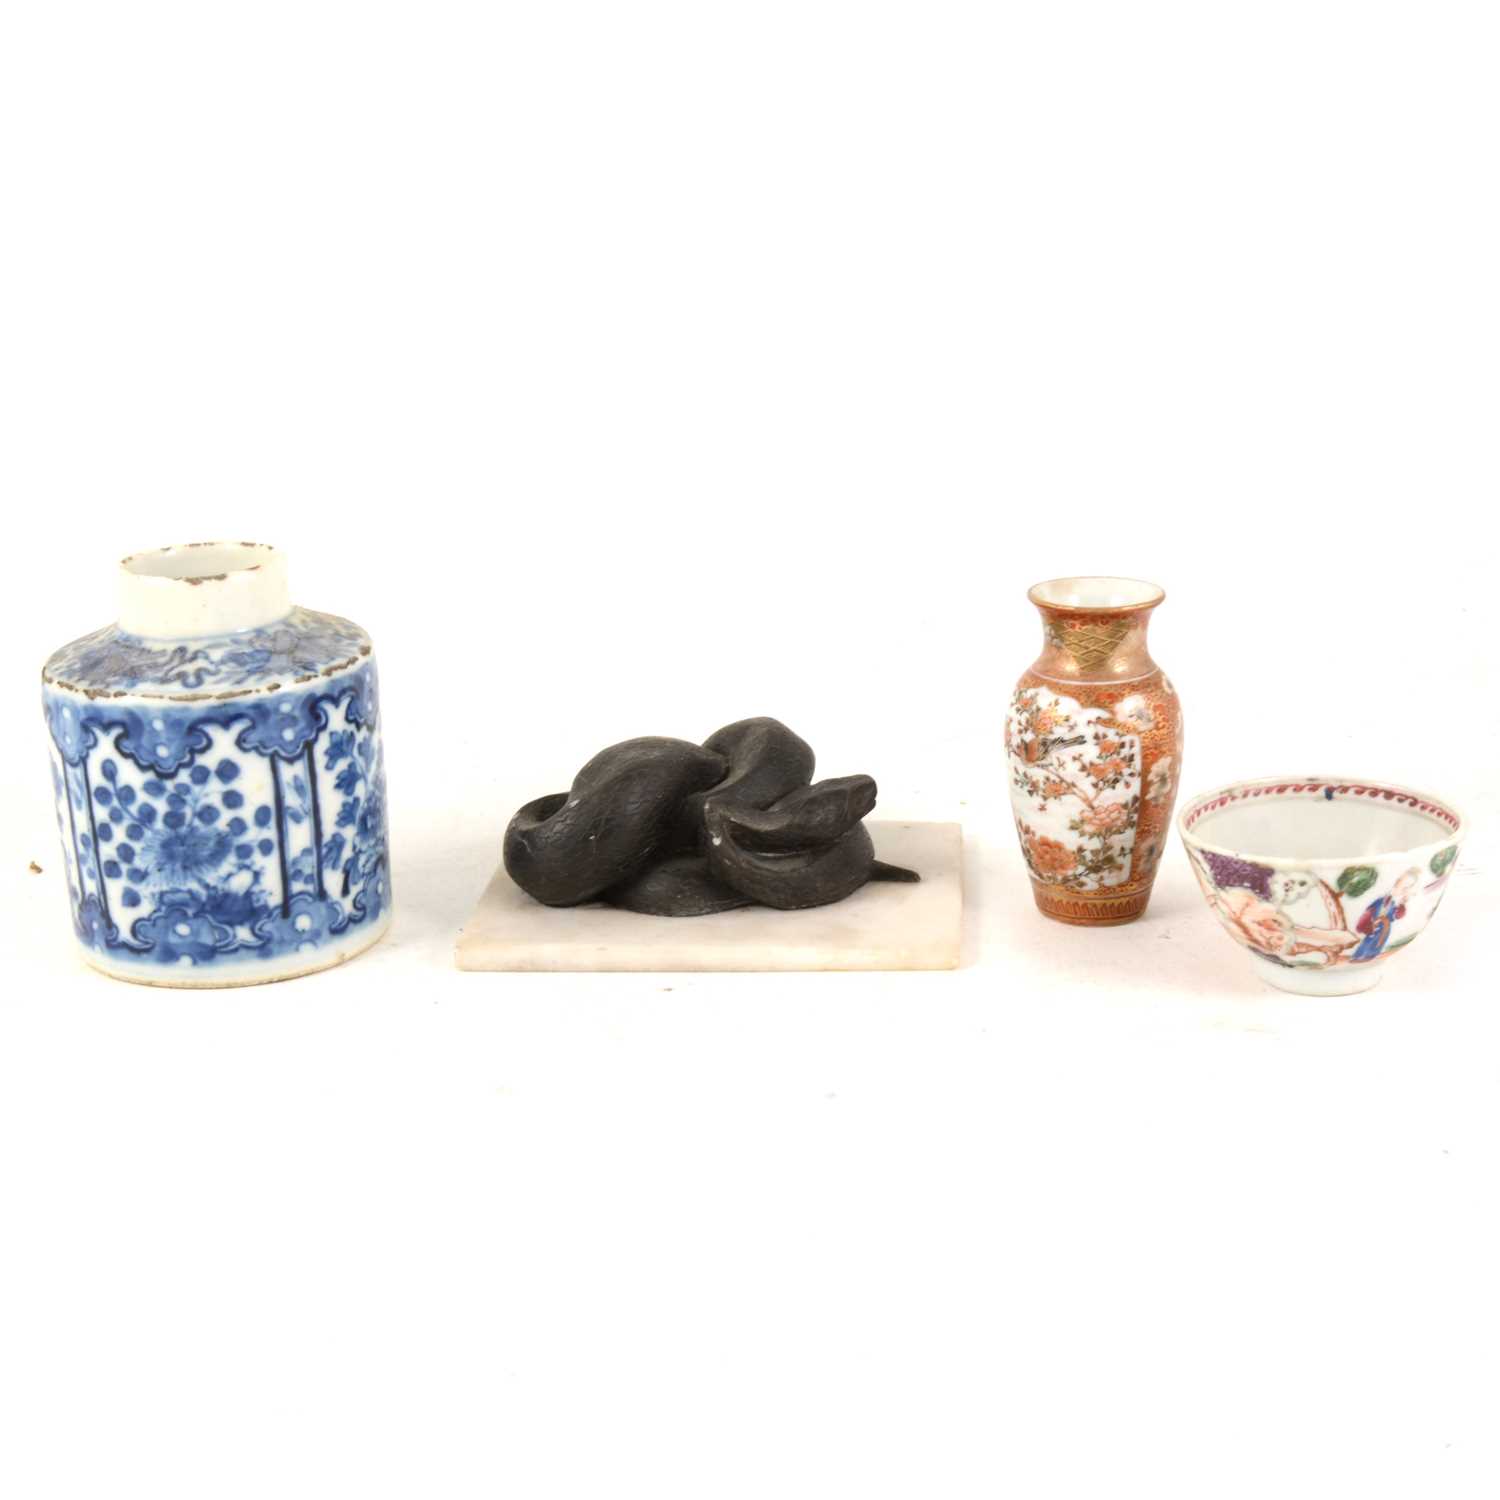 Lot 1027 - A Chinese blue and white porcelain caddy, small teabowl, miniature Japanese vase, and a snake desk ornament